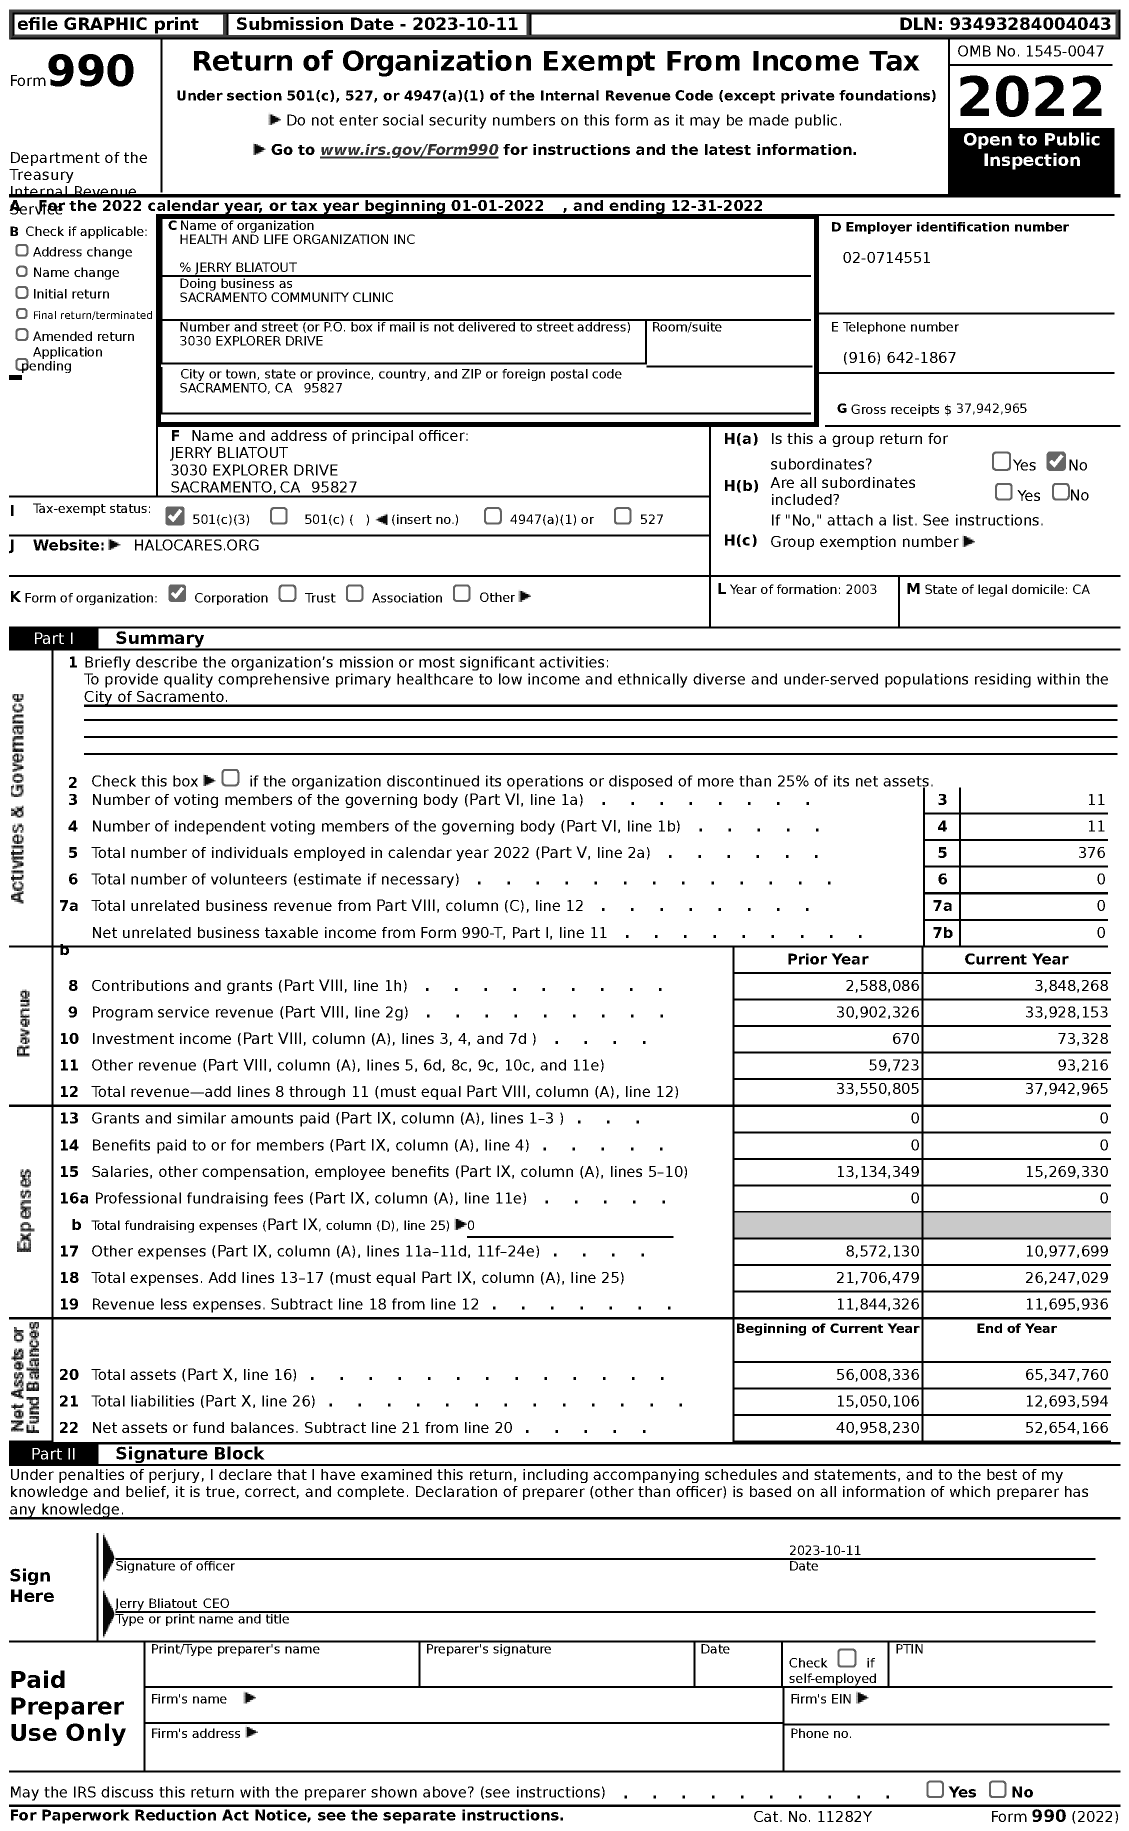 Image of first page of 2022 Form 990 for Health and Life Organization (HALO)